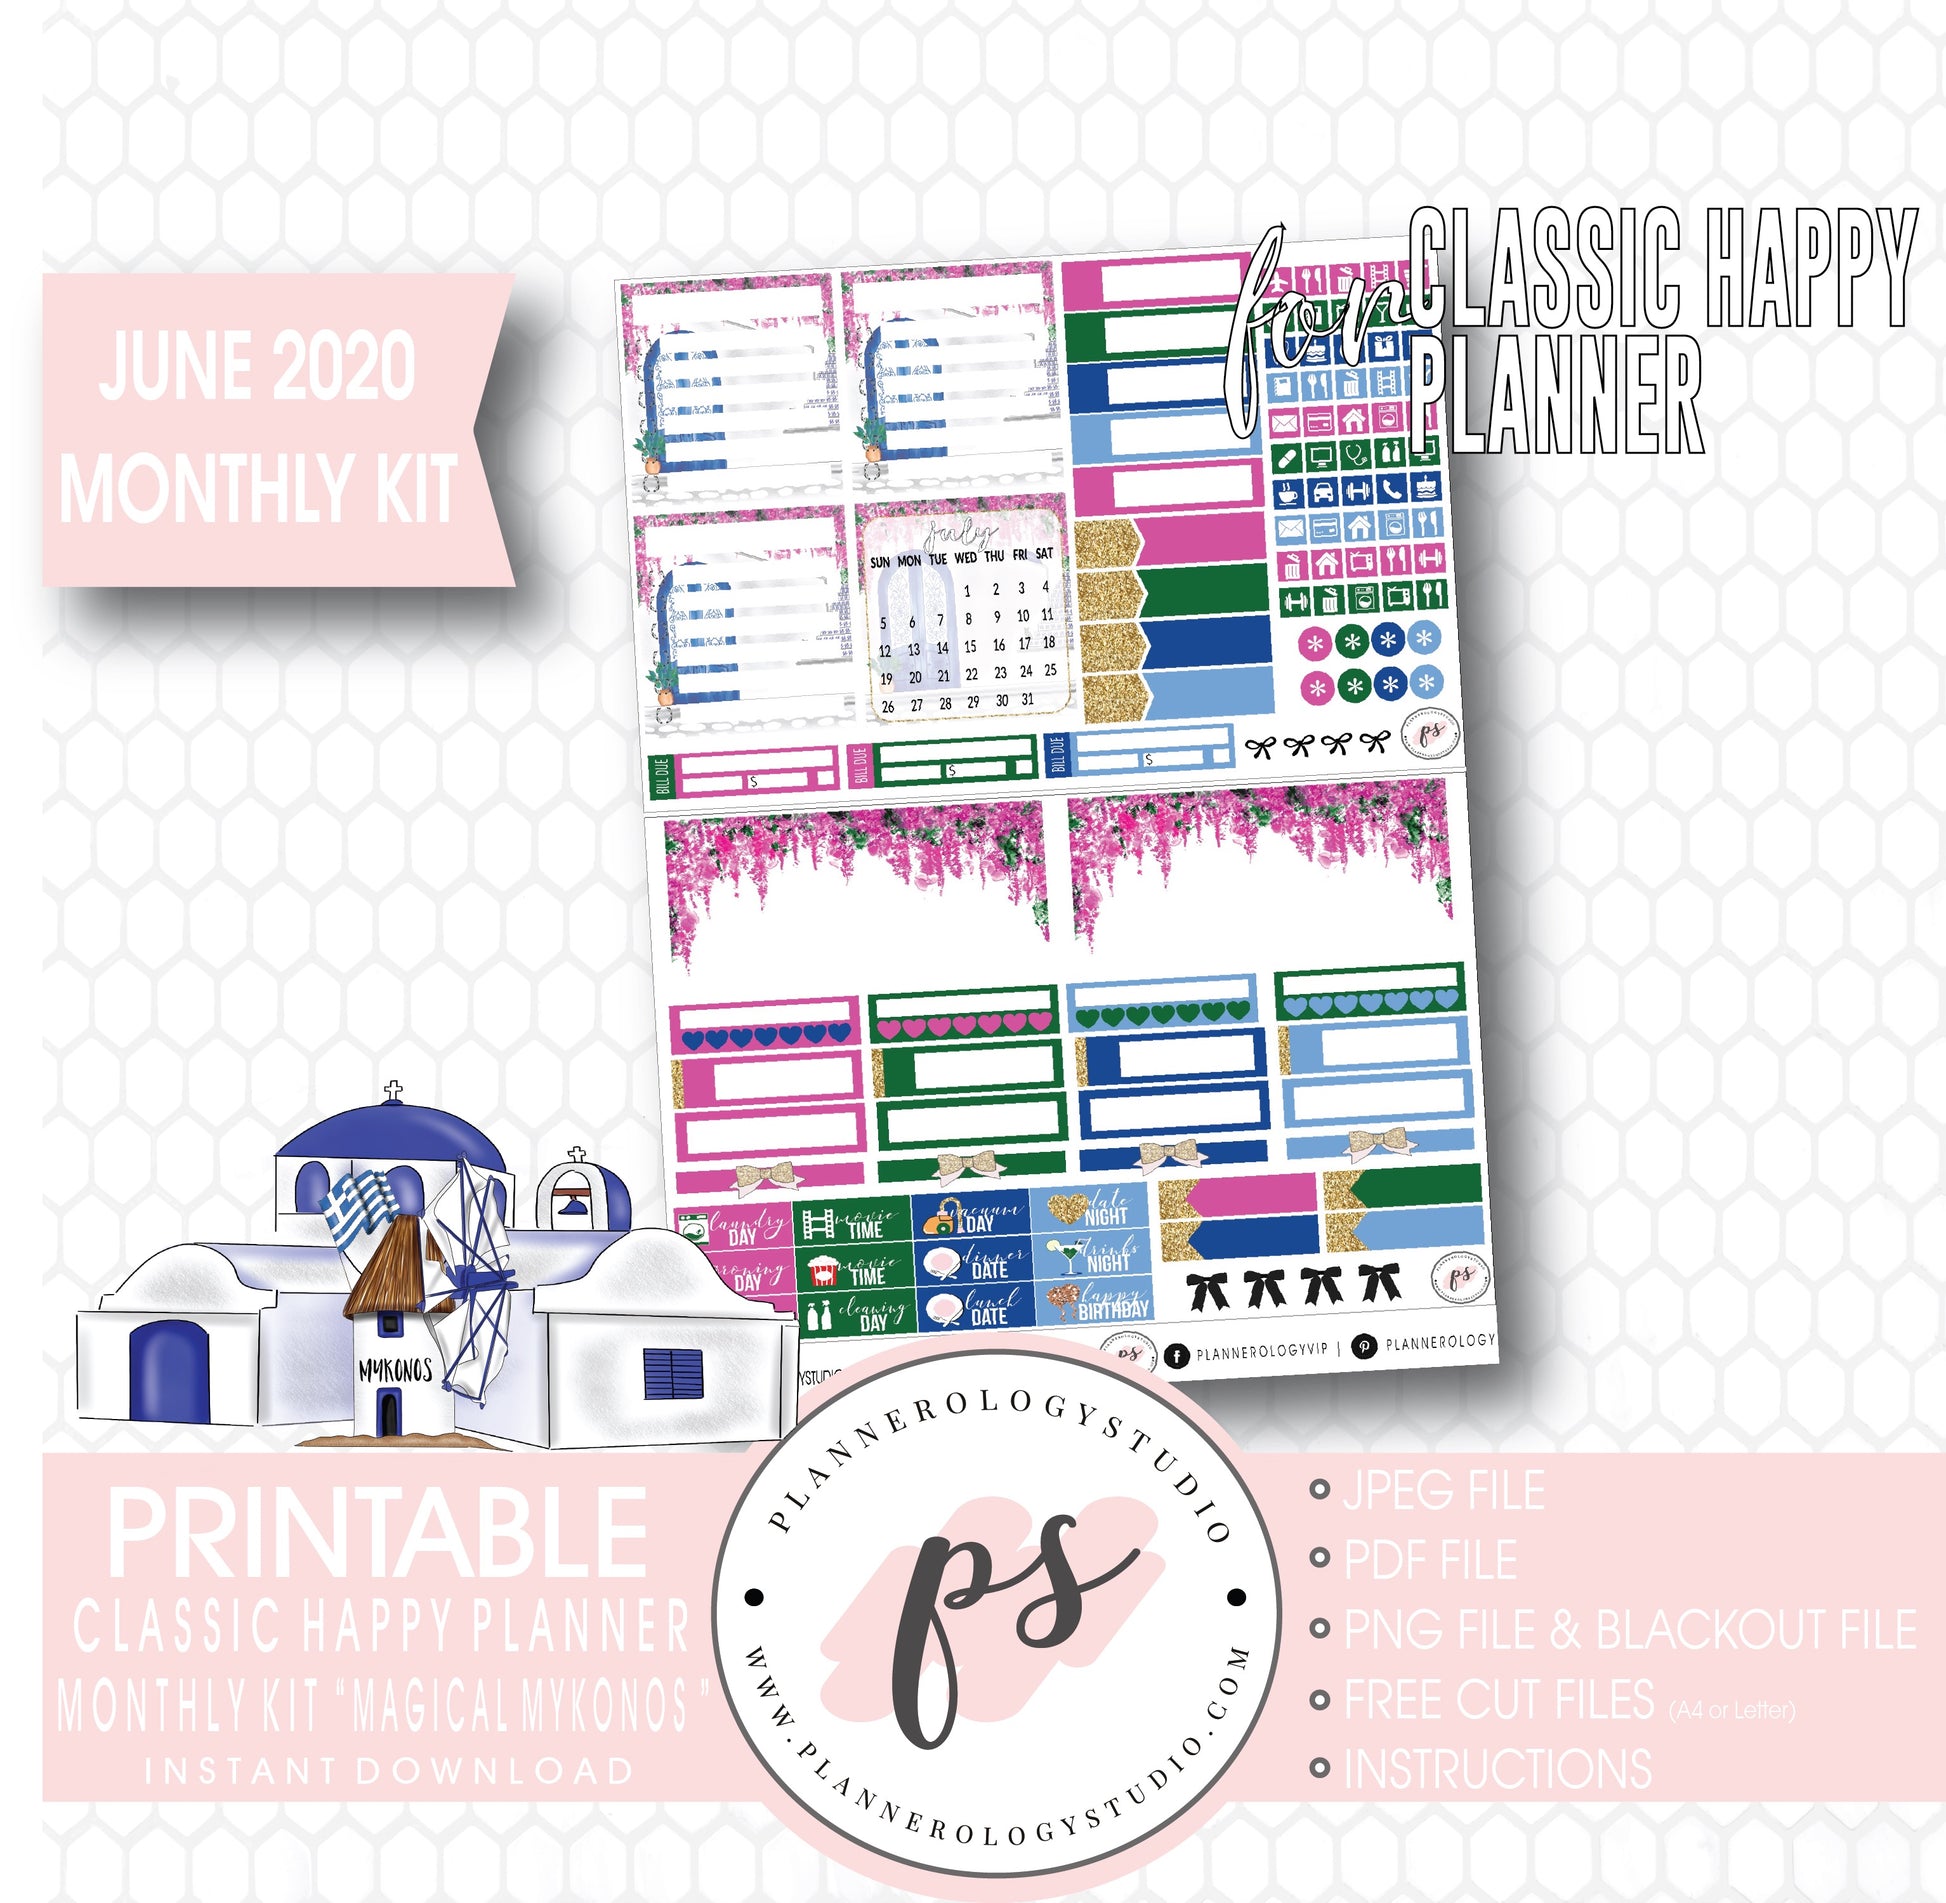 Magical Mykonos June 2020 Monthly View Kit Digital Printable Planner Stickers (for use with Classic Happy Planner) - Plannerologystudio